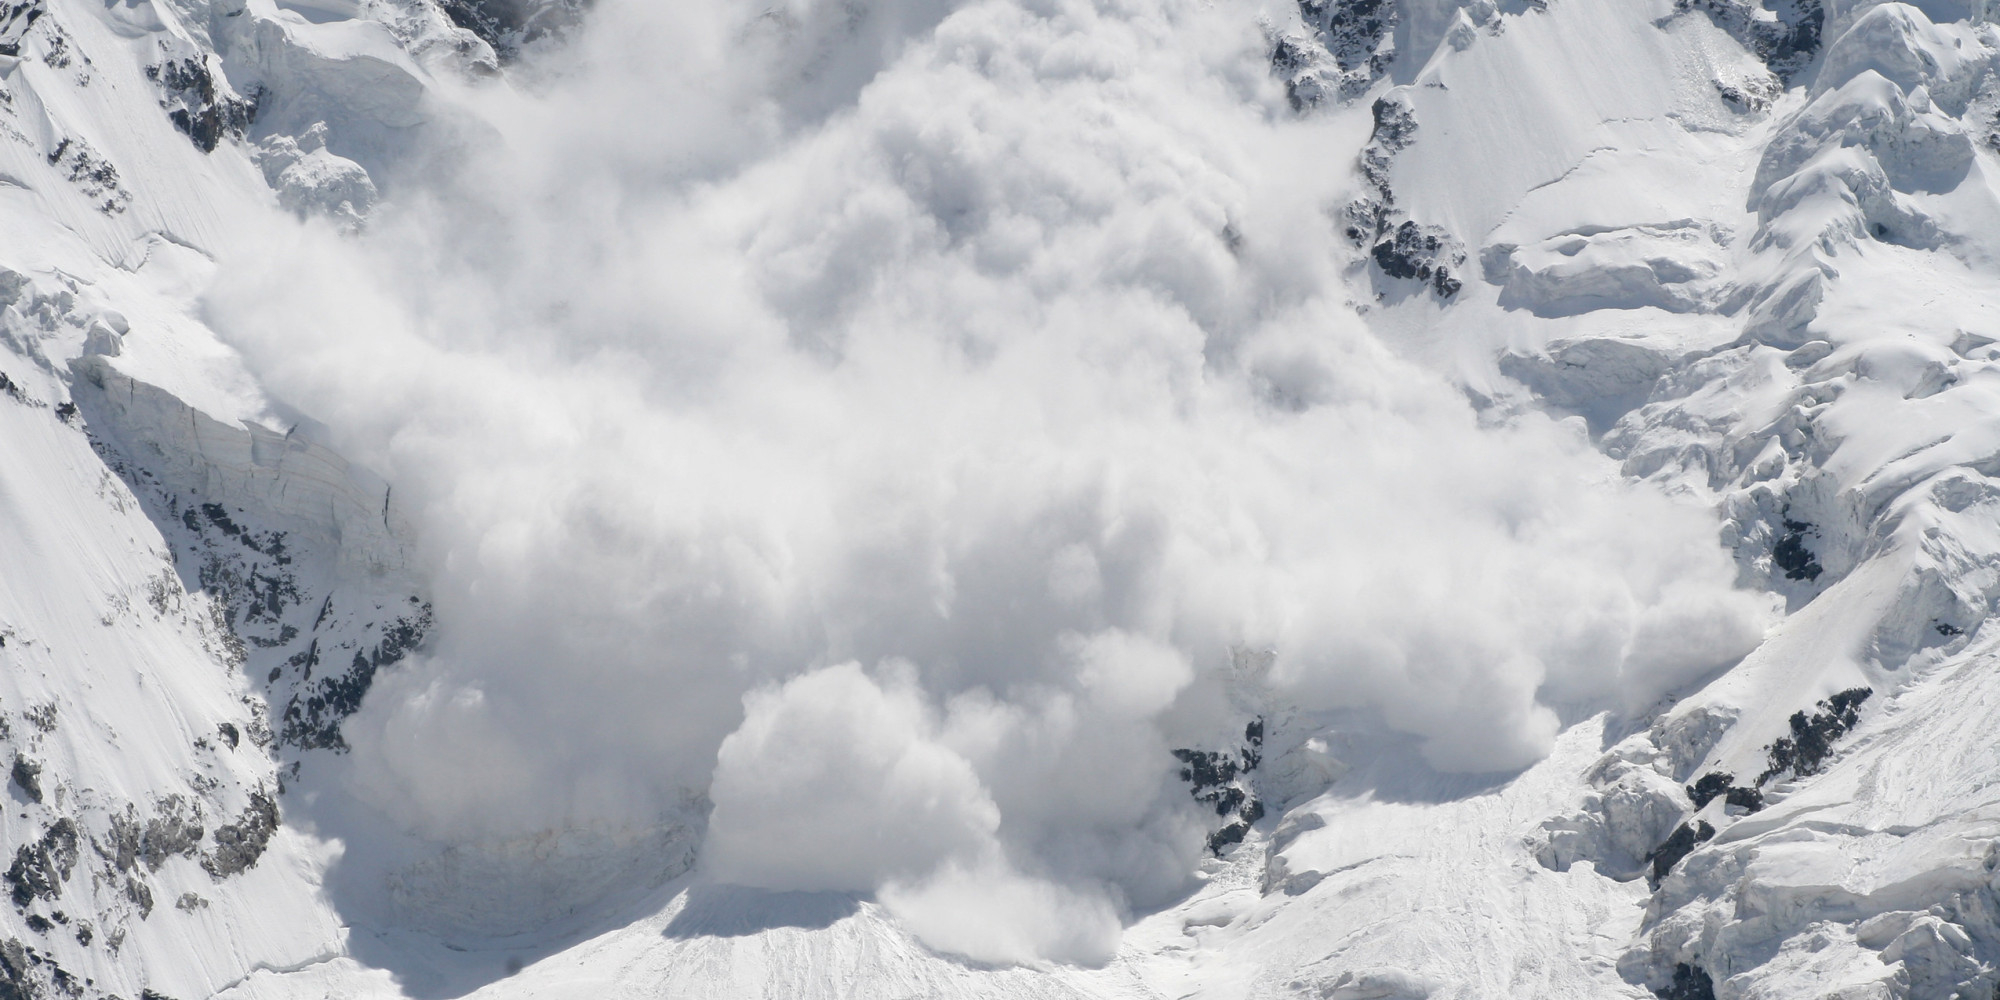 Snowboarder May Have Caused Montana Avalanche That Injured Three | HuffPost